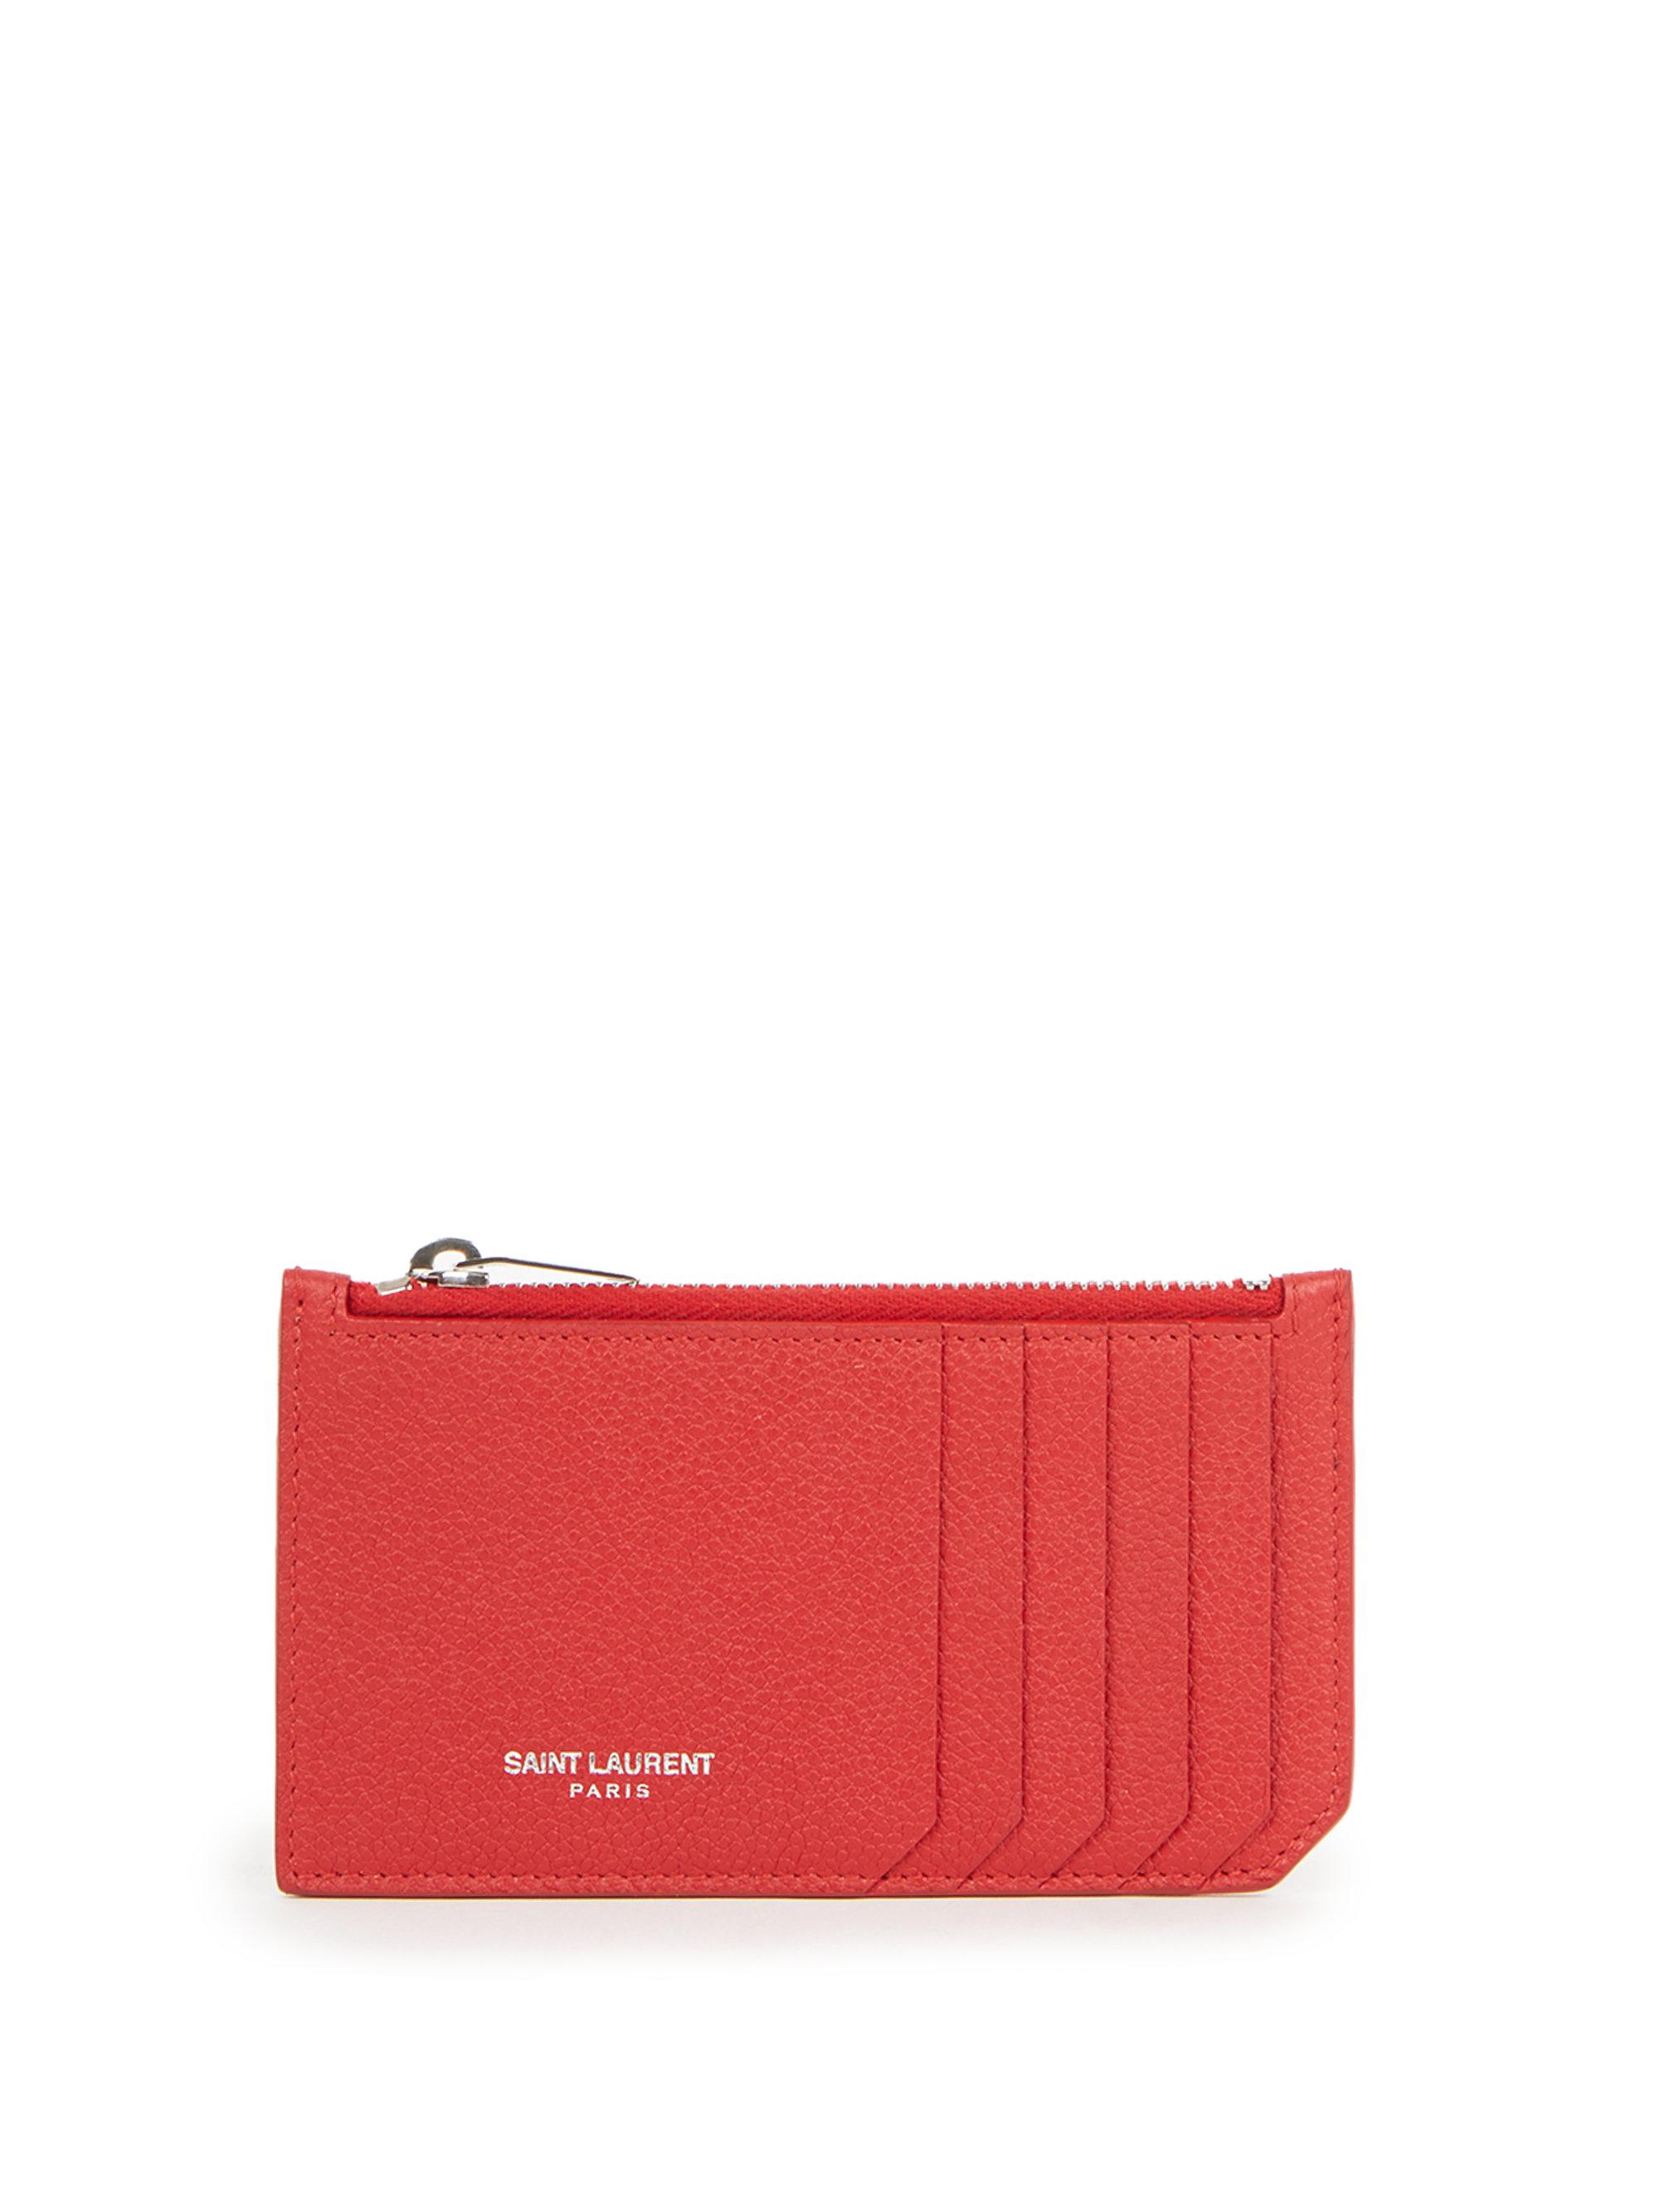 Saint Laurent Fragments Leather Zip Card Case in Red - Lyst